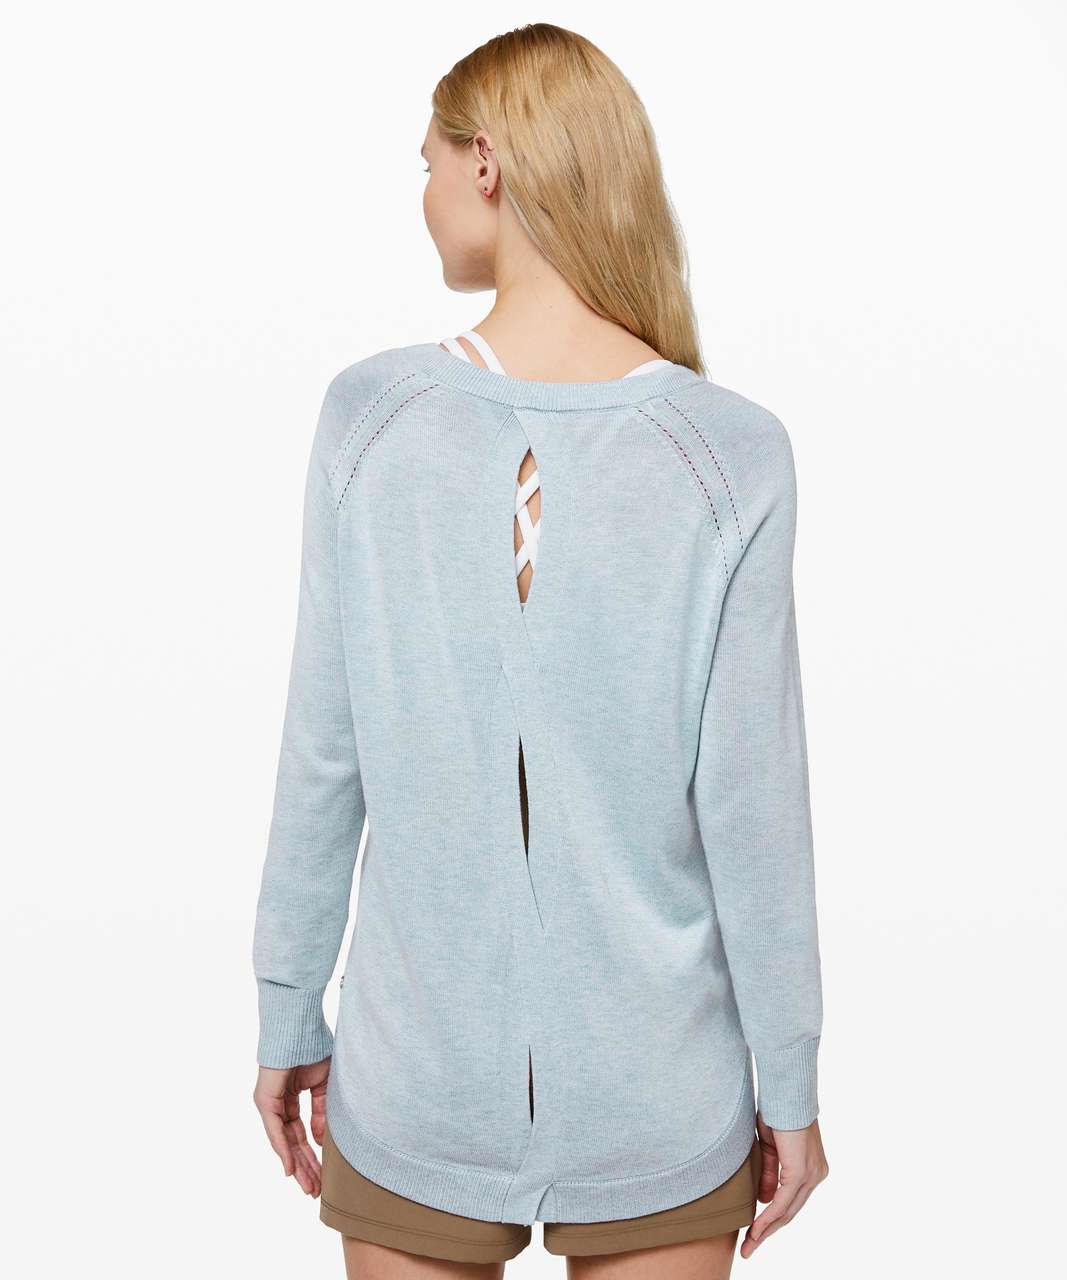 Lululemon Lead with Your Heart Sweater - Heathered Starlight